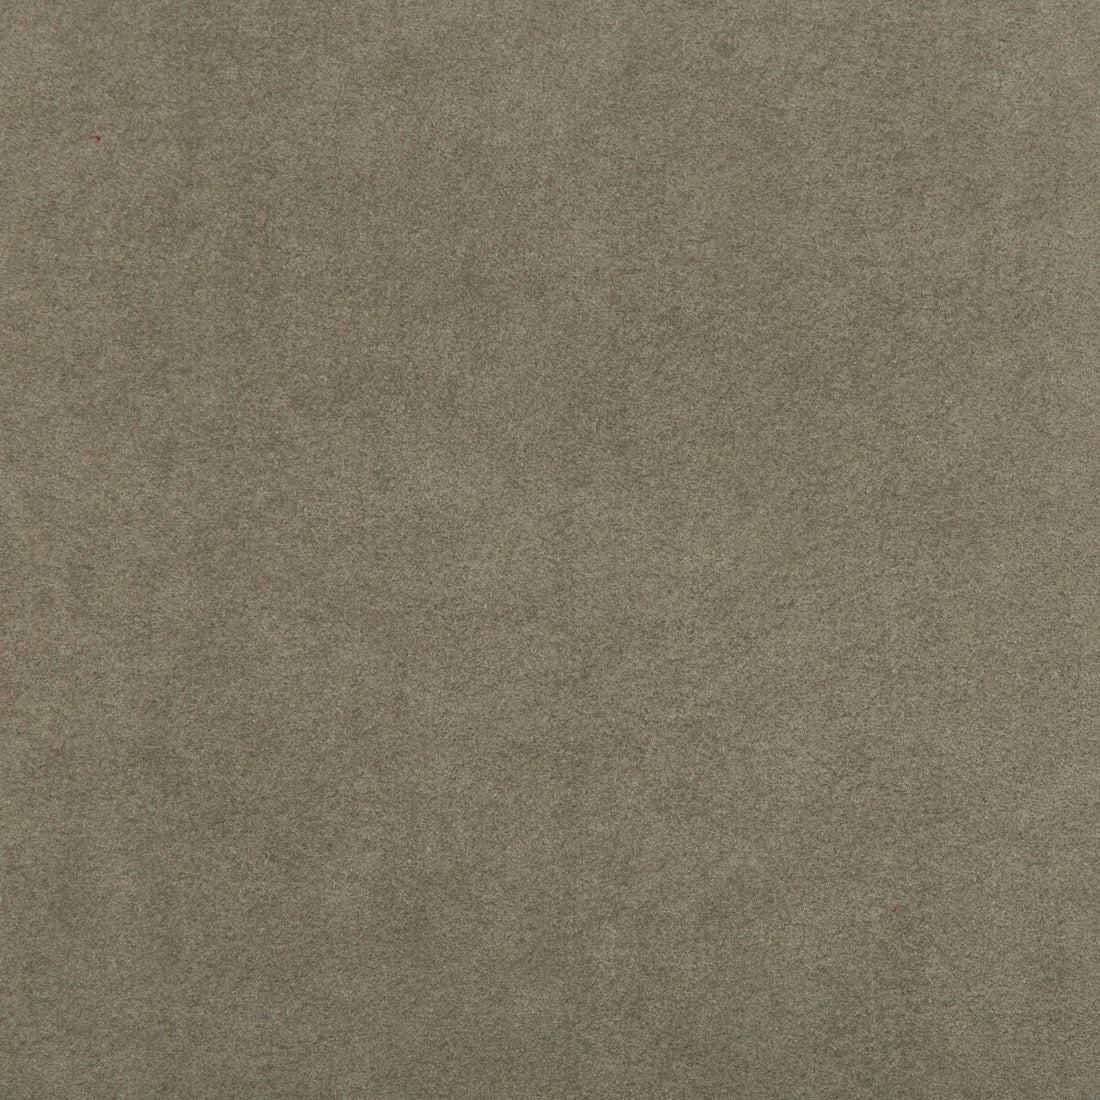 Ultimate fabric in pebble color - pattern 960122.1060.0 - by Lee Jofa in the Ultimate Suede collection